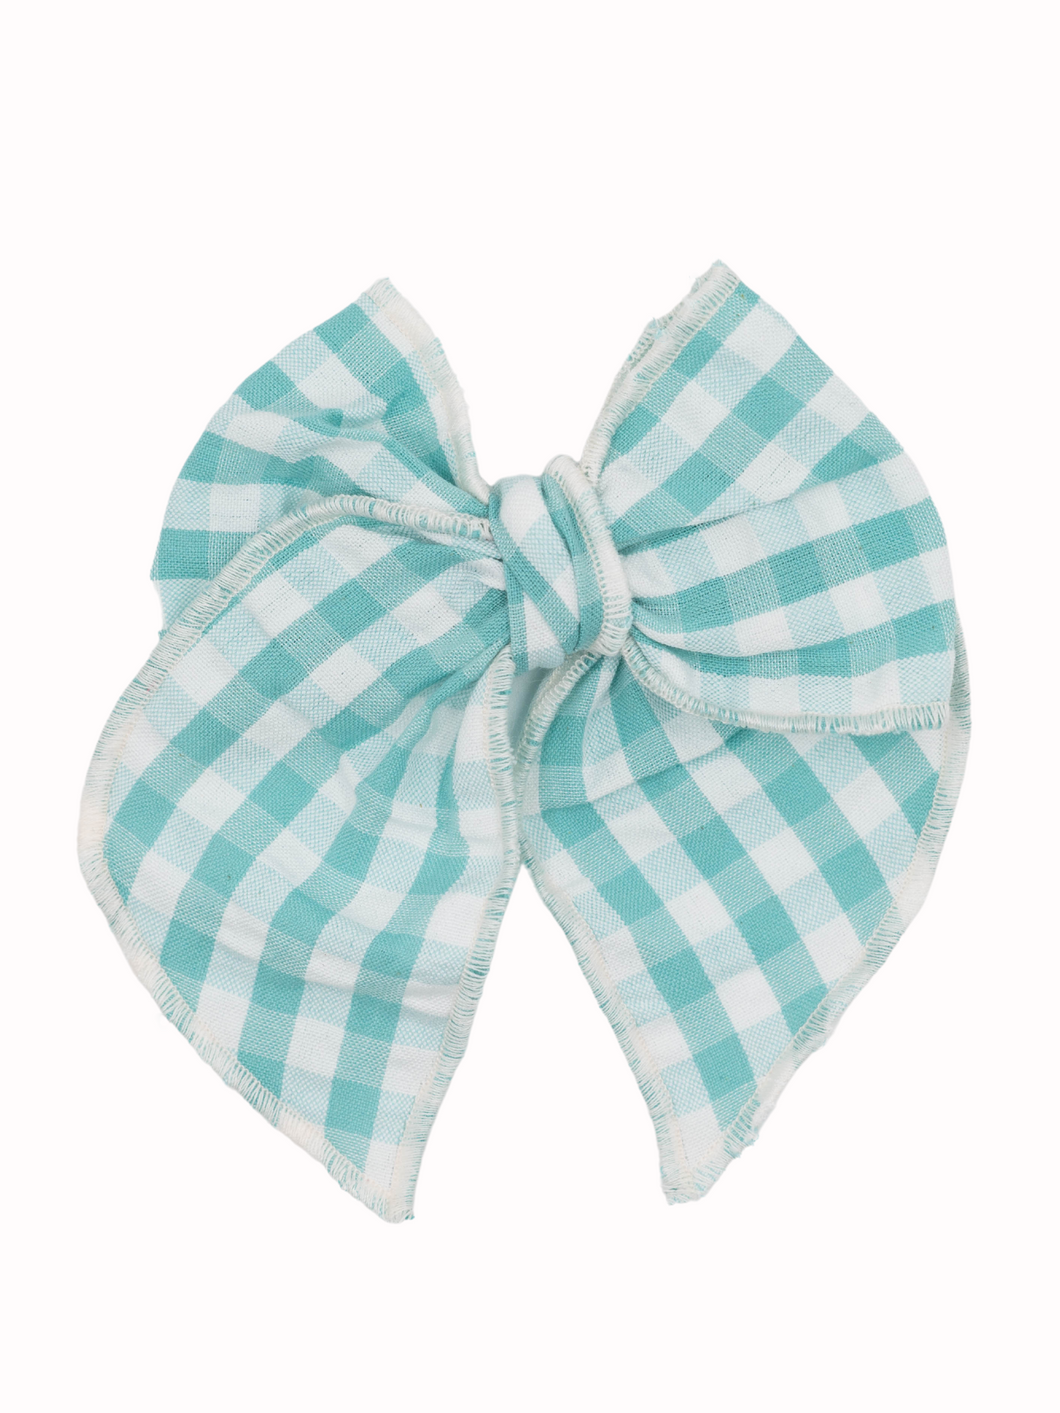 Livy Lou Collection Plaid Gingham fable bow